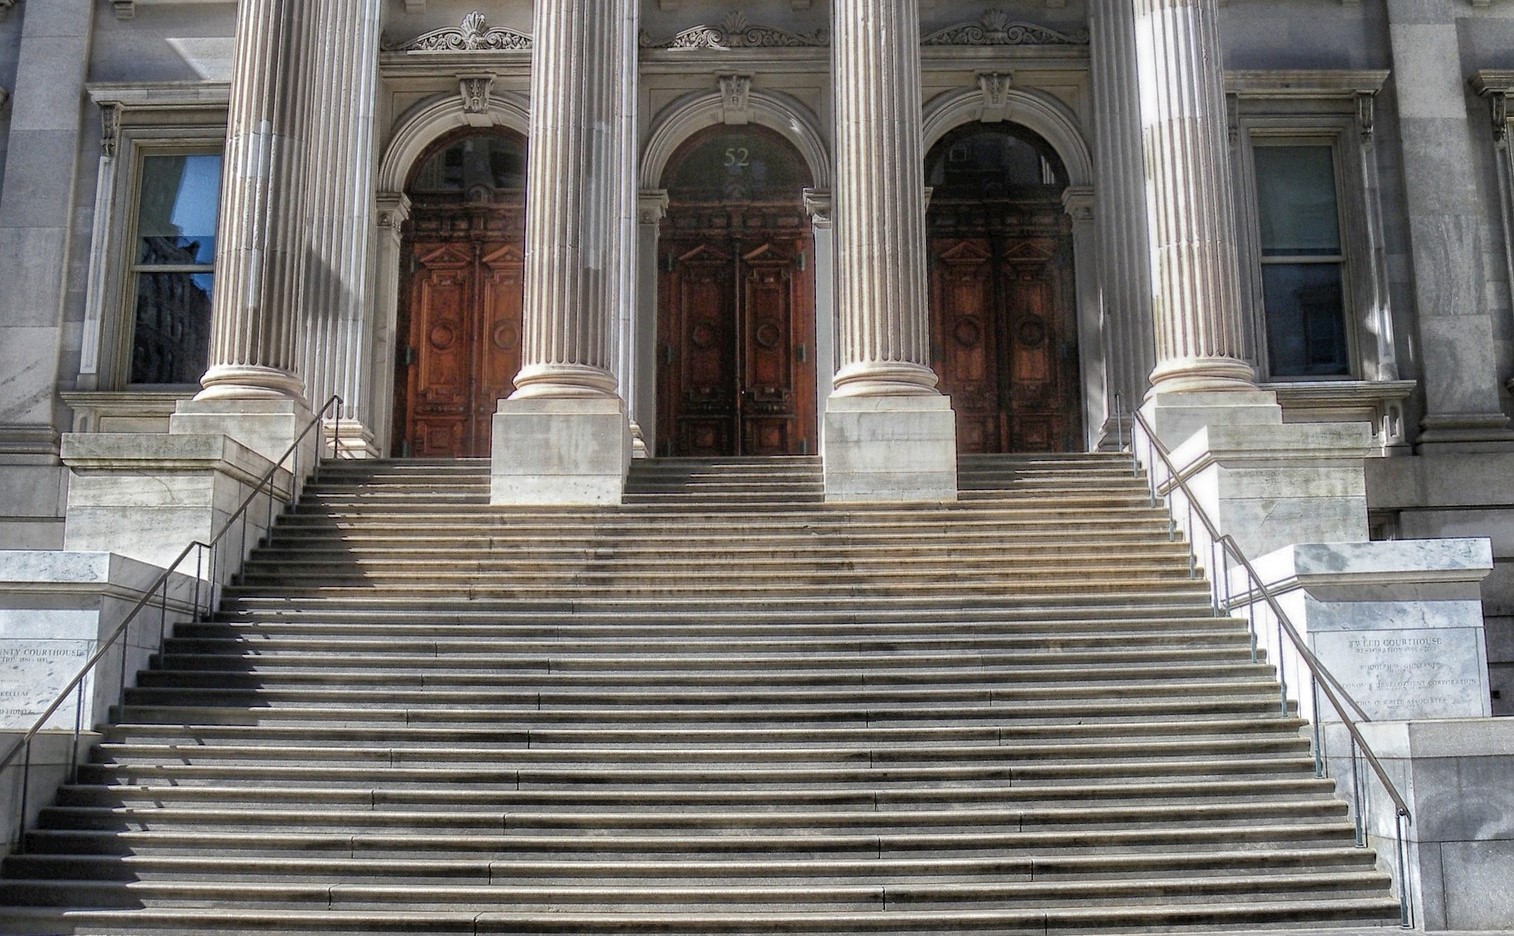 Steps to New York City Courthouse. Just another reason to hire an attorney.